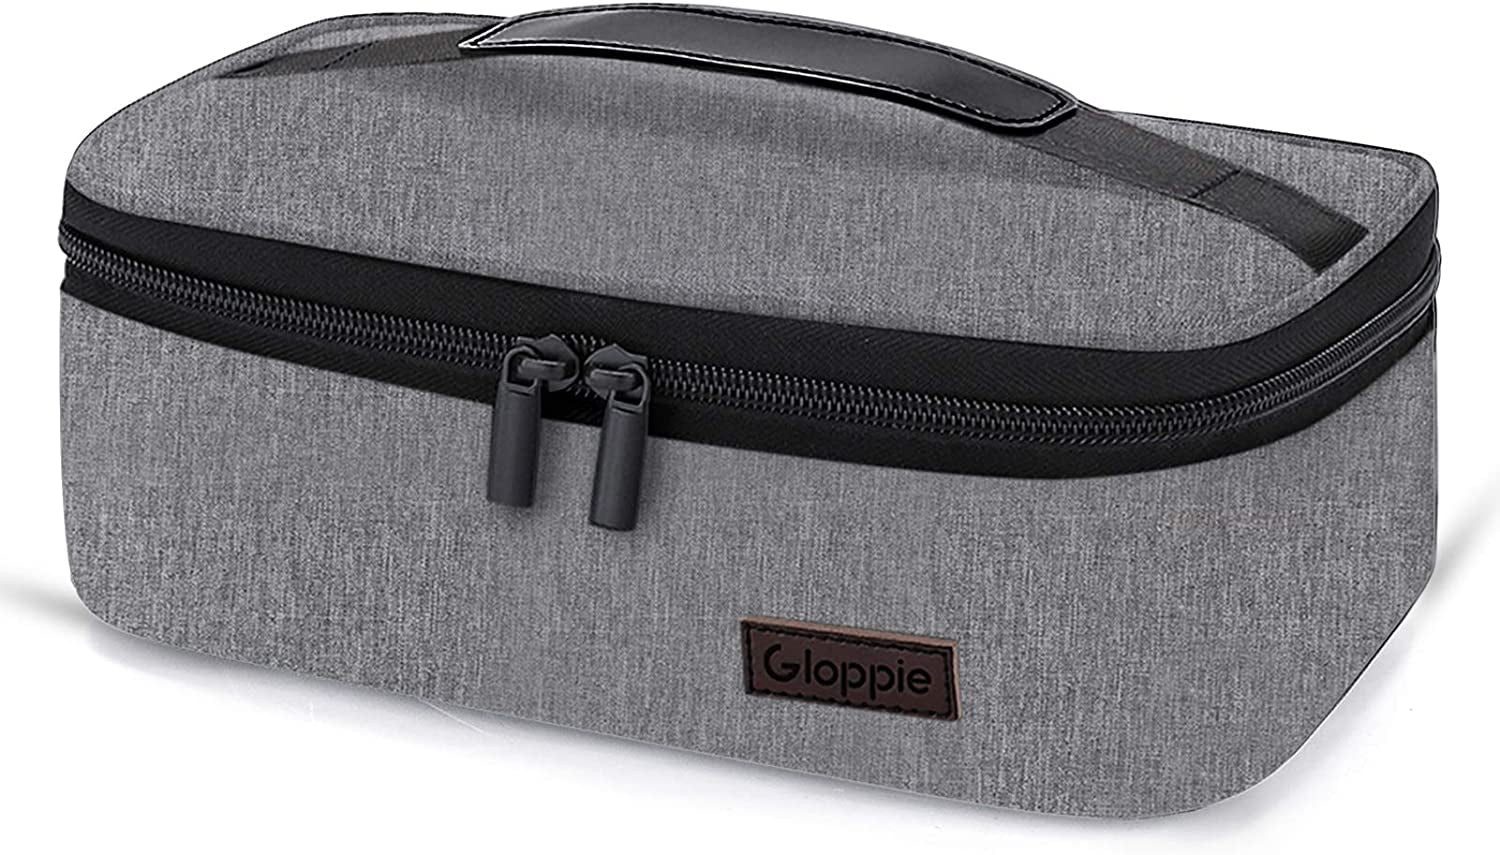 Gloppie Lunch Box for Men Kids Lunch Bag Women Insulated Lunch Cooler Bag Thermal Lunch Meal Prep Container Reusable Lunchbag Black Lunchbox for Adults Work Lunch Pail Loncheras Para Hombres